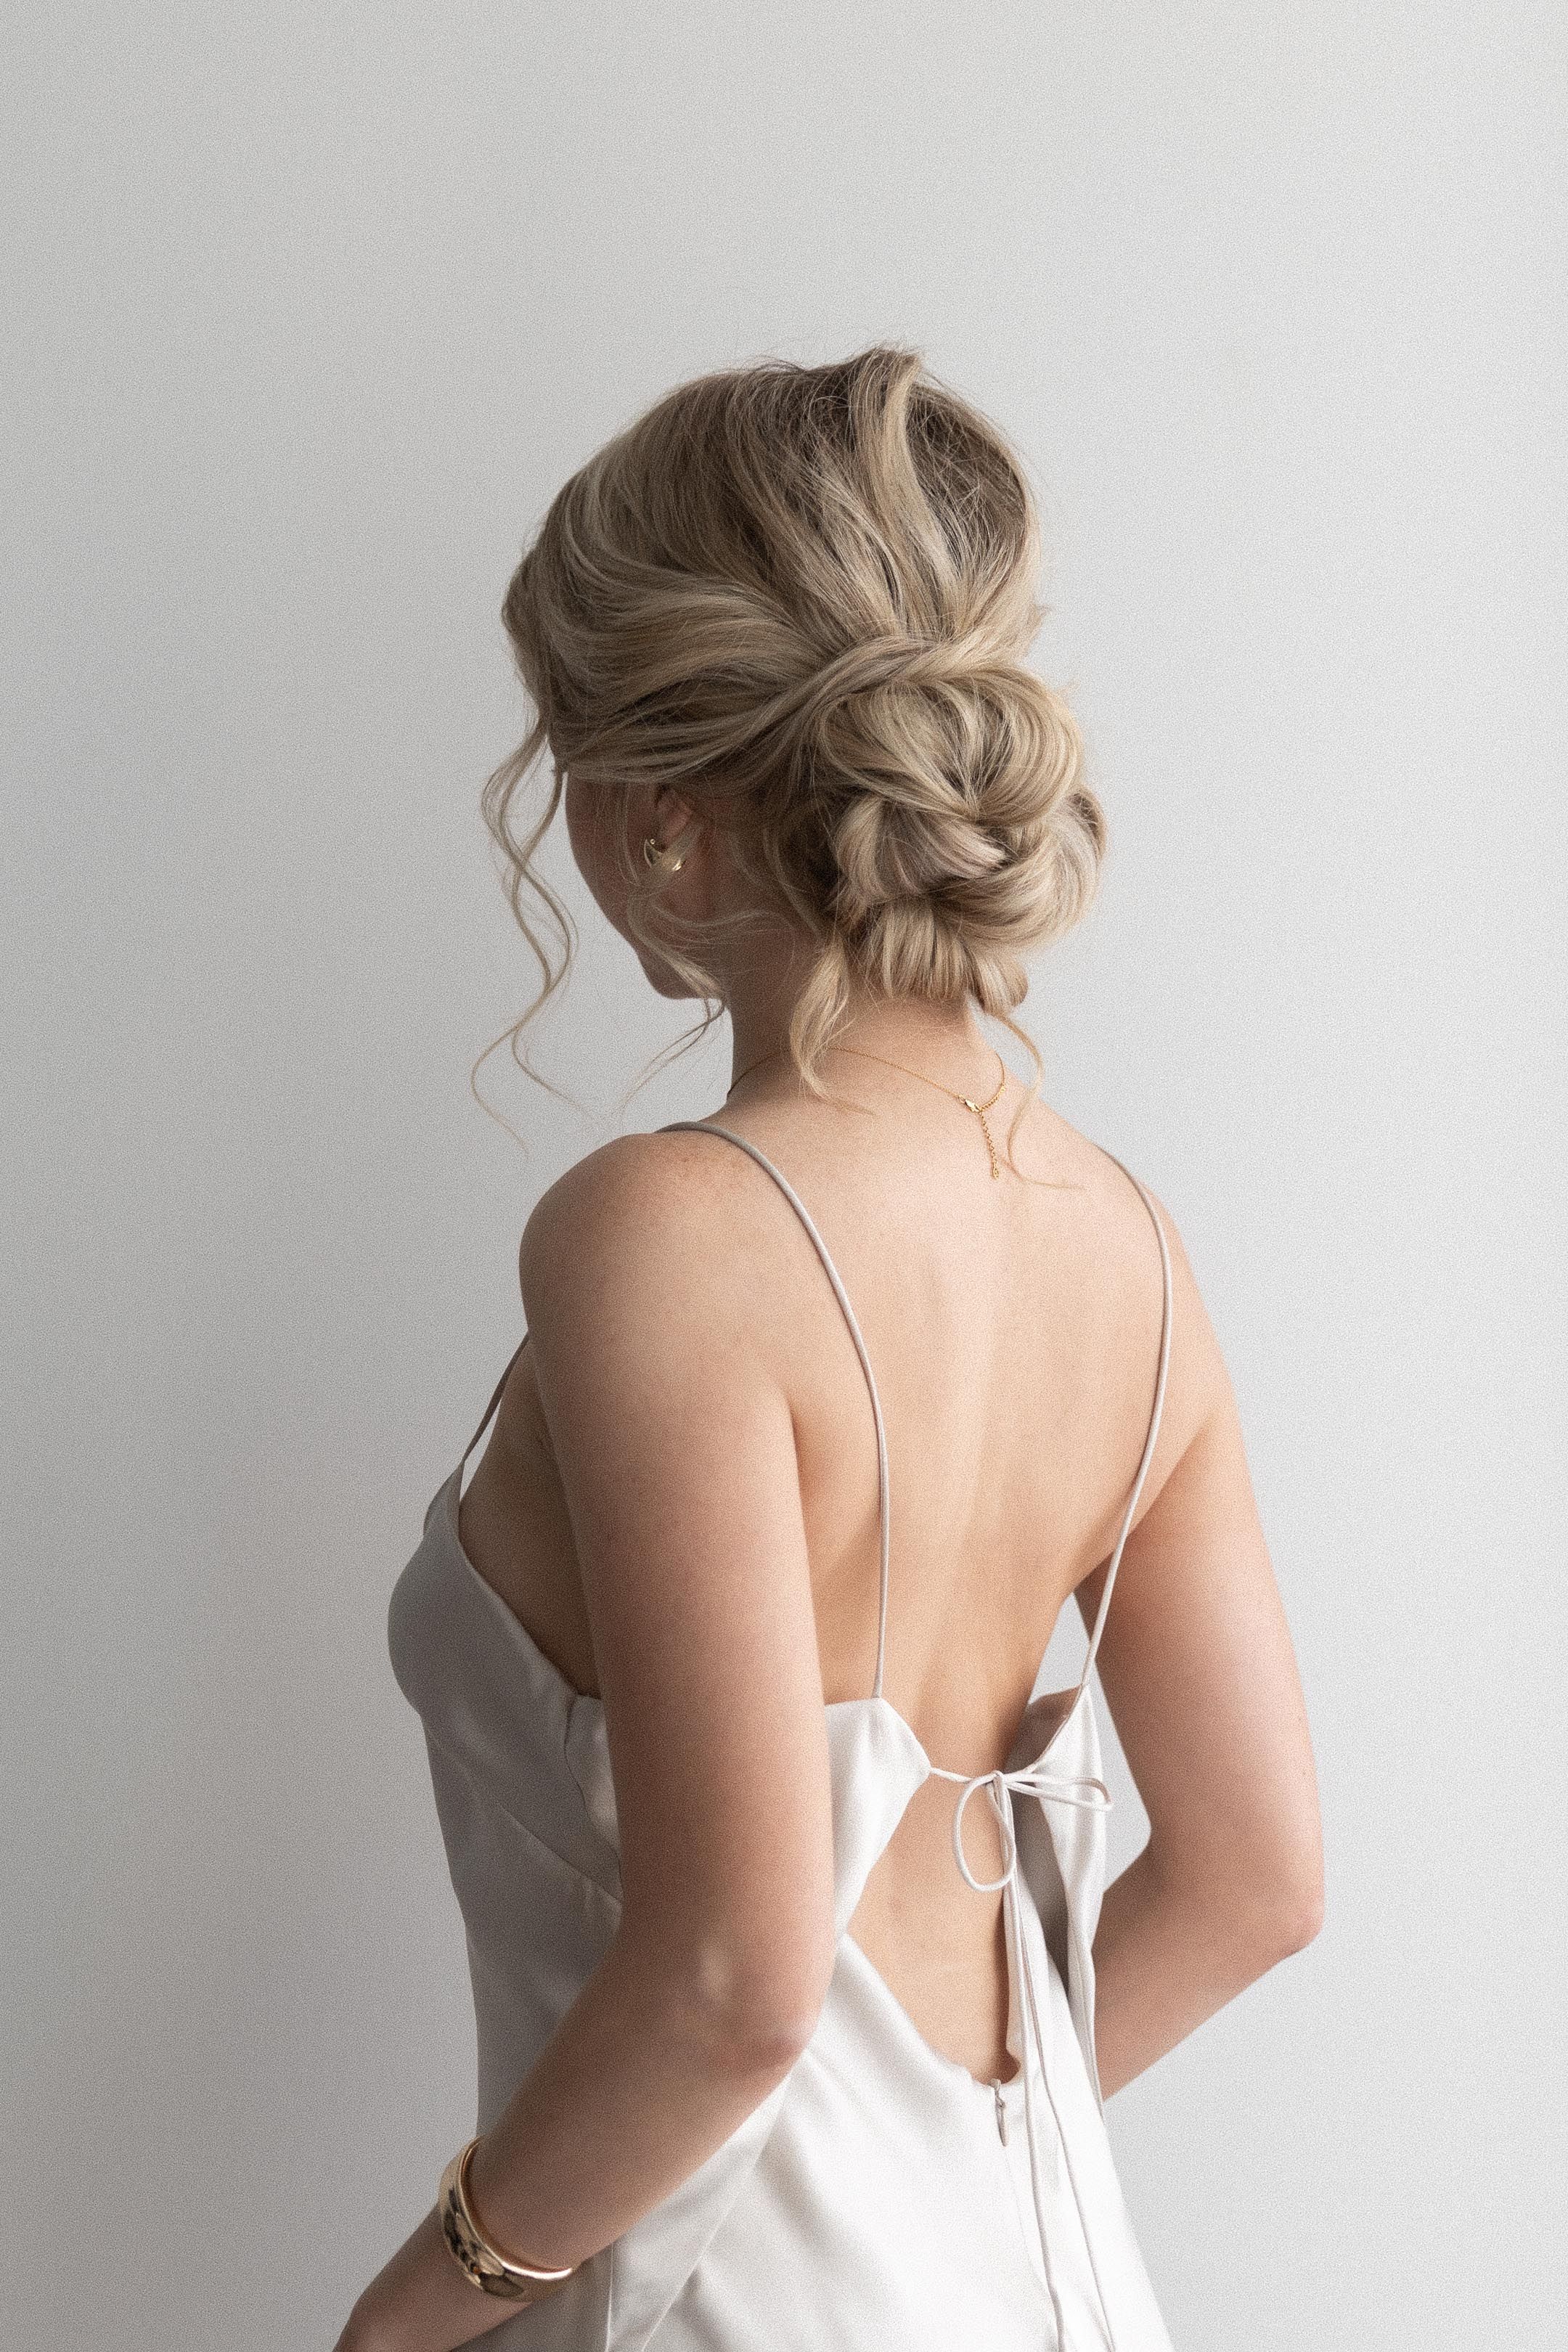 Wedding, Bridesmaid – Alex Gaboury Pertaining To Most Popular Bridesmaid’s Updo For Long Hair (Gallery 10 of 15)